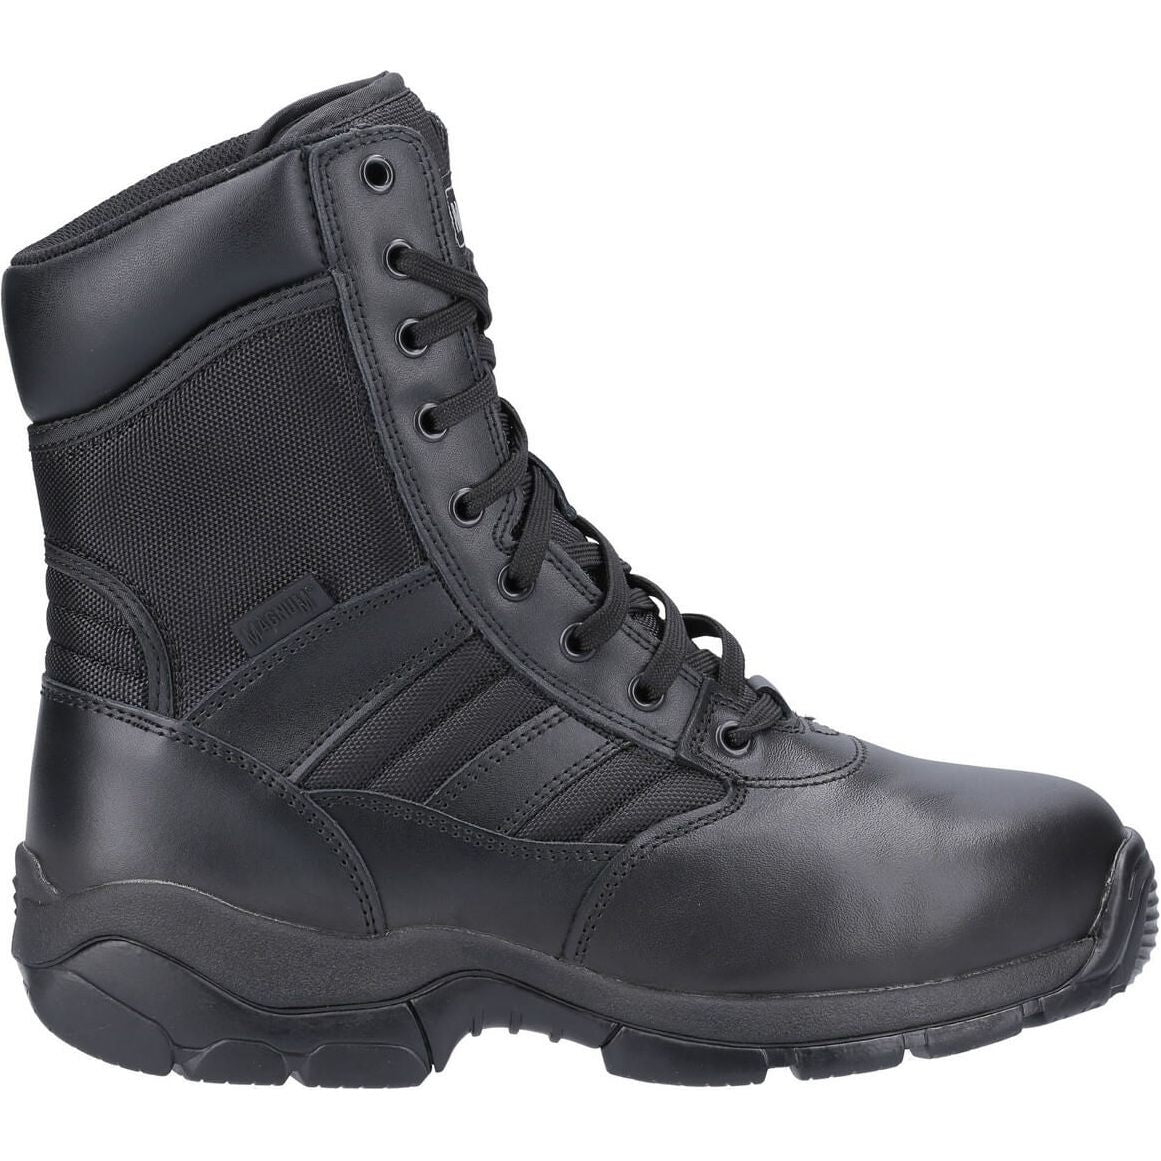 Magnum Panther 8.0 Steel Toe Safety Boots-Black-4